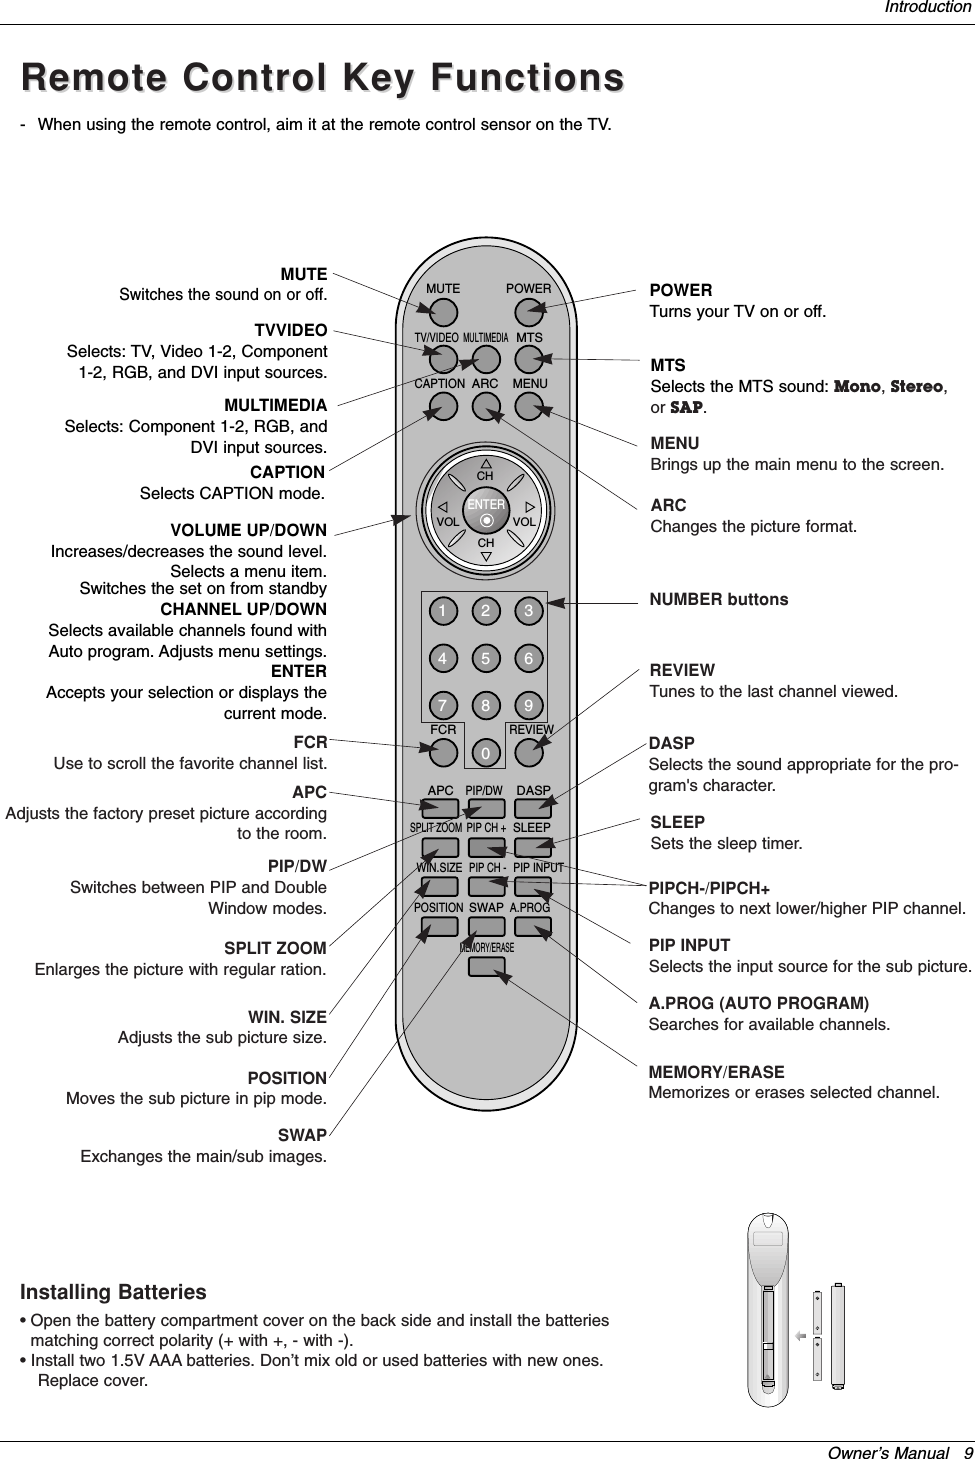 Owner’s Manual   9Introduction- When using the remote control, aim it at the remote control sensor on the TV.POWERMUTETV/VIDEOMULTIMEDIAMTSCAPTIONCHCHVOLENTER1234567890VOLARCMENUFCRPIP/DWAPC DASPREVIEWSPLIT ZOOMPIP CH +SLEEPPIP CH -PIP INPUTWIN.SIZESWAPMEMORY/ERASEA.PROGPOSITIONMUTESwitches the sound on or off.TVVIDEOSelects: TV, Video 1-2, Component1-2, RGB, and DVI input sources.MULTIMEDIASelects: Component 1-2, RGB, andDVI input sources.CAPTIONSelects CAPTION mode.VOLUME UP/DOWNIncreases/decreases the sound level.Selects a menu item.Switches the set on from standbyCHANNEL UP/DOWNSelects available channels found withAuto program. Adjusts menu settings.ENTERAccepts your selection or displays thecurrent mode.POWERTurns your TV on or off.MTSSelects the MTS sound: Mono, Stereo,or SAP.MENUBrings up the main menu to the screen.REVIEWTunes to the last channel viewed.NUMBER buttonsARC Changes the picture format.PIP INPUTSelects the input source for the sub picture.SWAPExchanges the main/sub images.PIP/DWSwitches between PIP and DoubleWindow modes.PIPCH-/PIPCH+Changes to next lower/higher PIP channel.POSITIONMoves the sub picture in pip mode.SLEEPSets the sleep timer.FCRUse to scroll the favorite channel list.MEMORY/ERASEMemorizes or erases selected channel. A.PROG (AUTO PROGRAM)Searches for available channels.SPLIT ZOOMEnlarges the picture with regular ration.Installing Batteries• Open the battery compartment cover on the back side and install the batteriesmatching correct polarity (+ with +, - with -).• Install two 1.5V AAA batteries. Don’t mix old or used batteries with new ones.Replace cover.Remote Control Key FunctionsRemote Control Key FunctionsWIN. SIZEAdjusts the sub picture size.APCAdjusts the factory preset picture accordingto the room.DASPSelects the sound appropriate for the pro-gram&apos;s character.